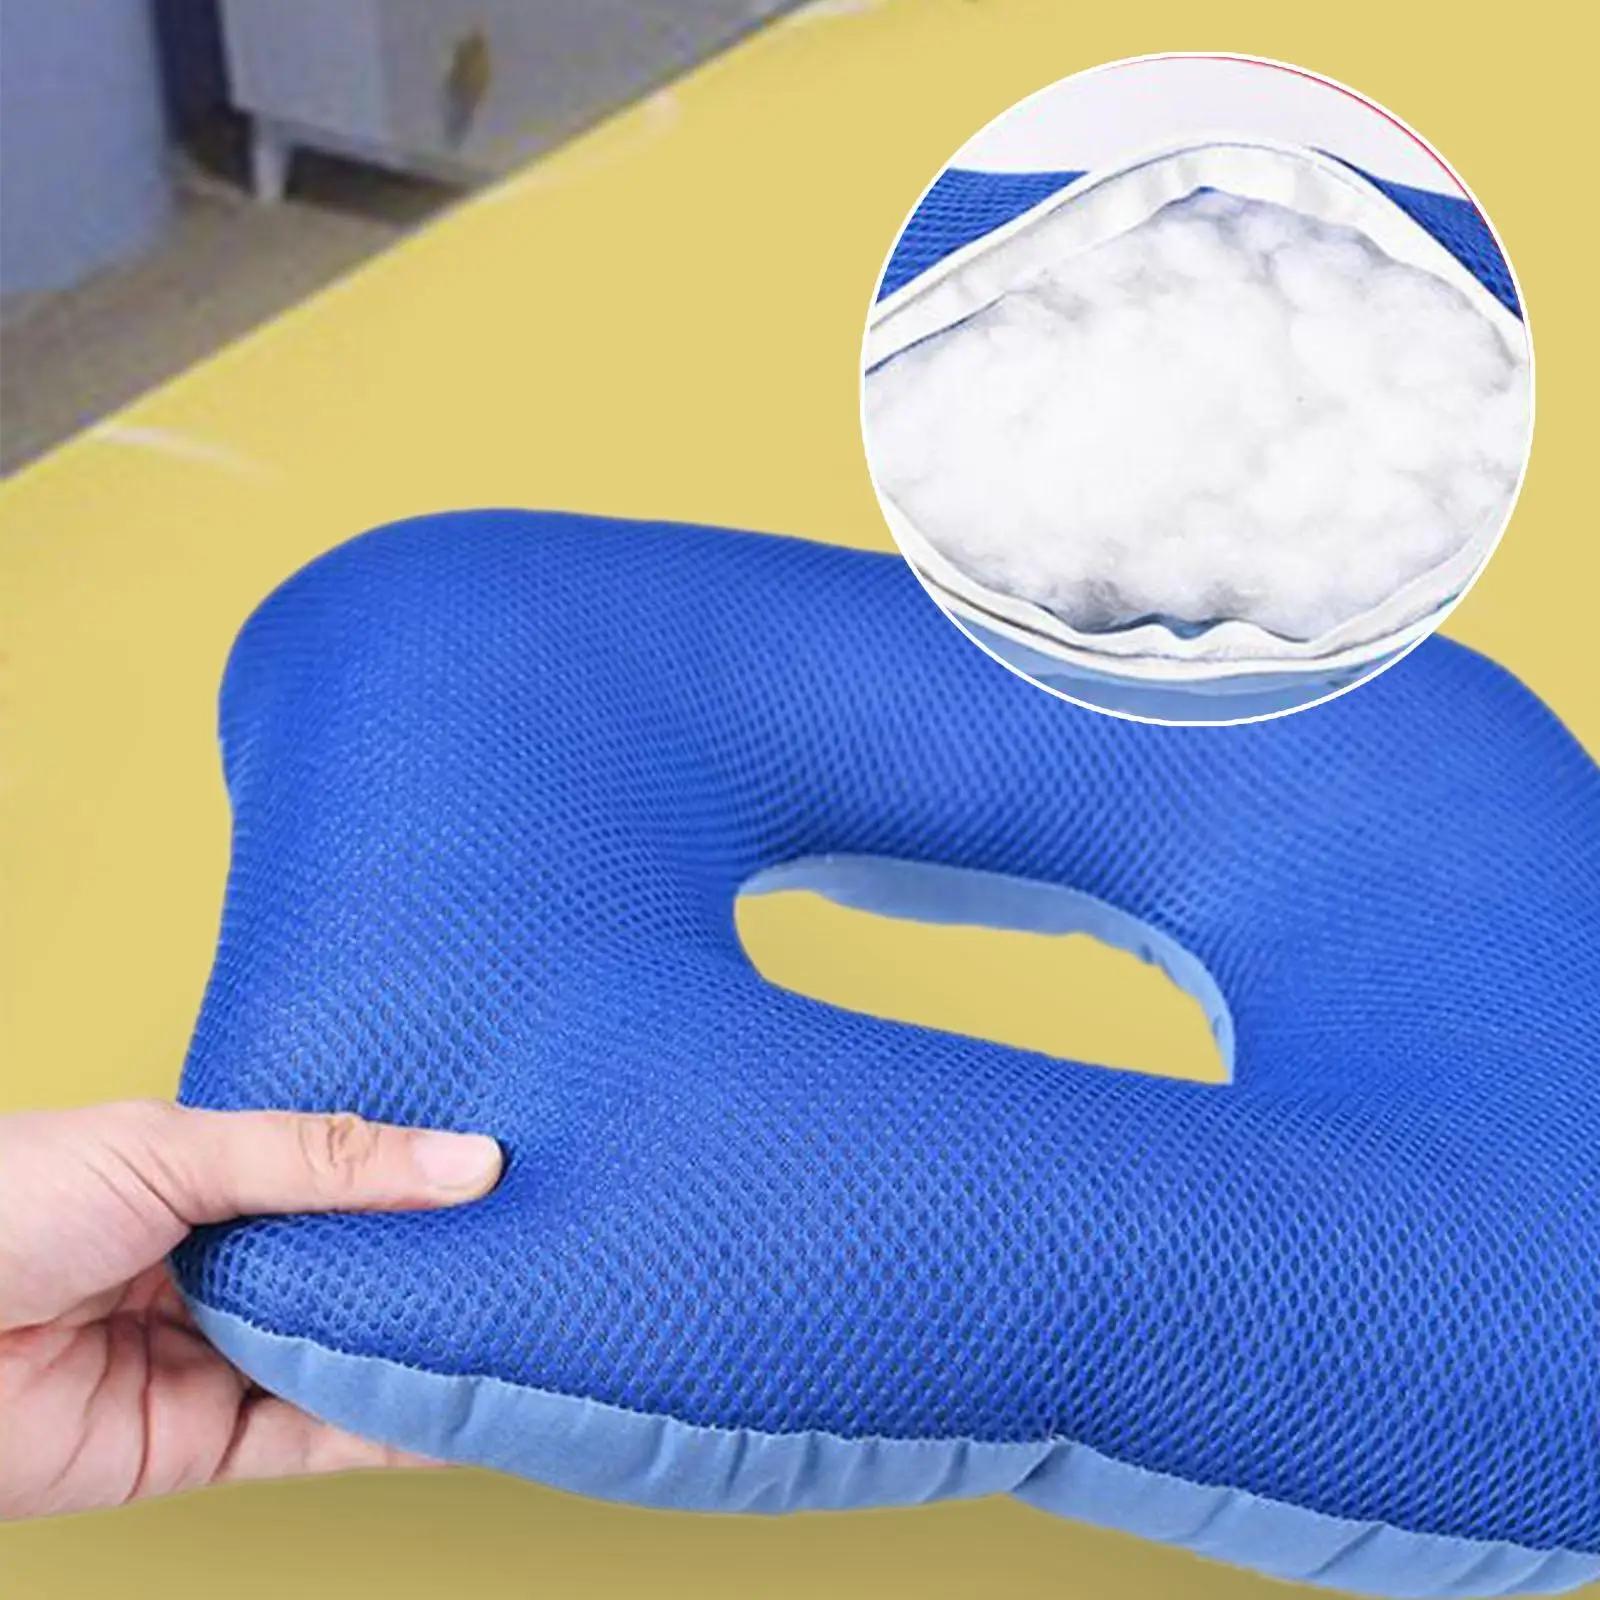 Seat Pad Cushion Easy to Clean Support Portable Support Donut Cushion Tailbone Cushion for Office Chair Long Time Sitting Car